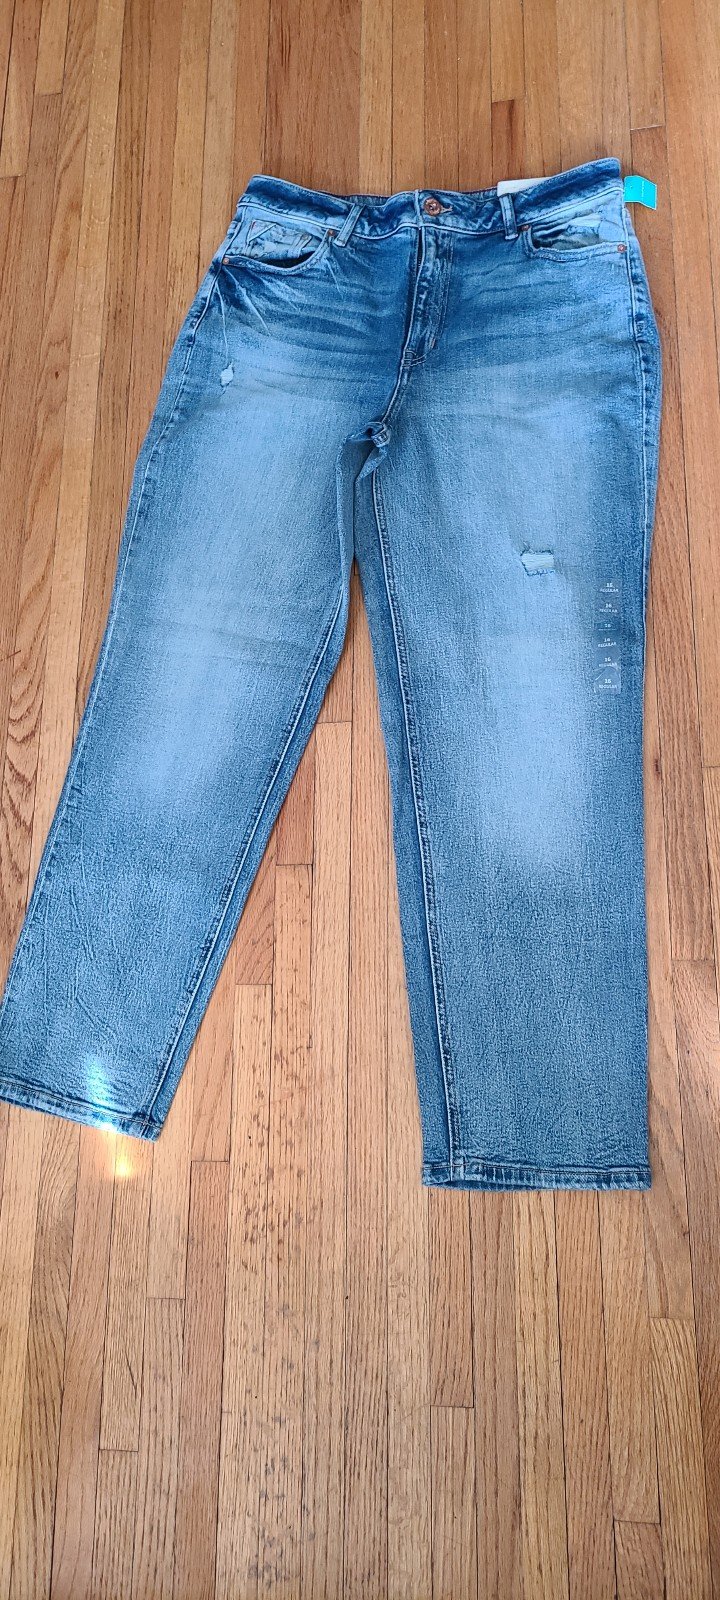 The Best Seller NWT EDGELY JEANS BY MAURICES,  16 REGULAR iEcSE4EKB Counter Genuine 